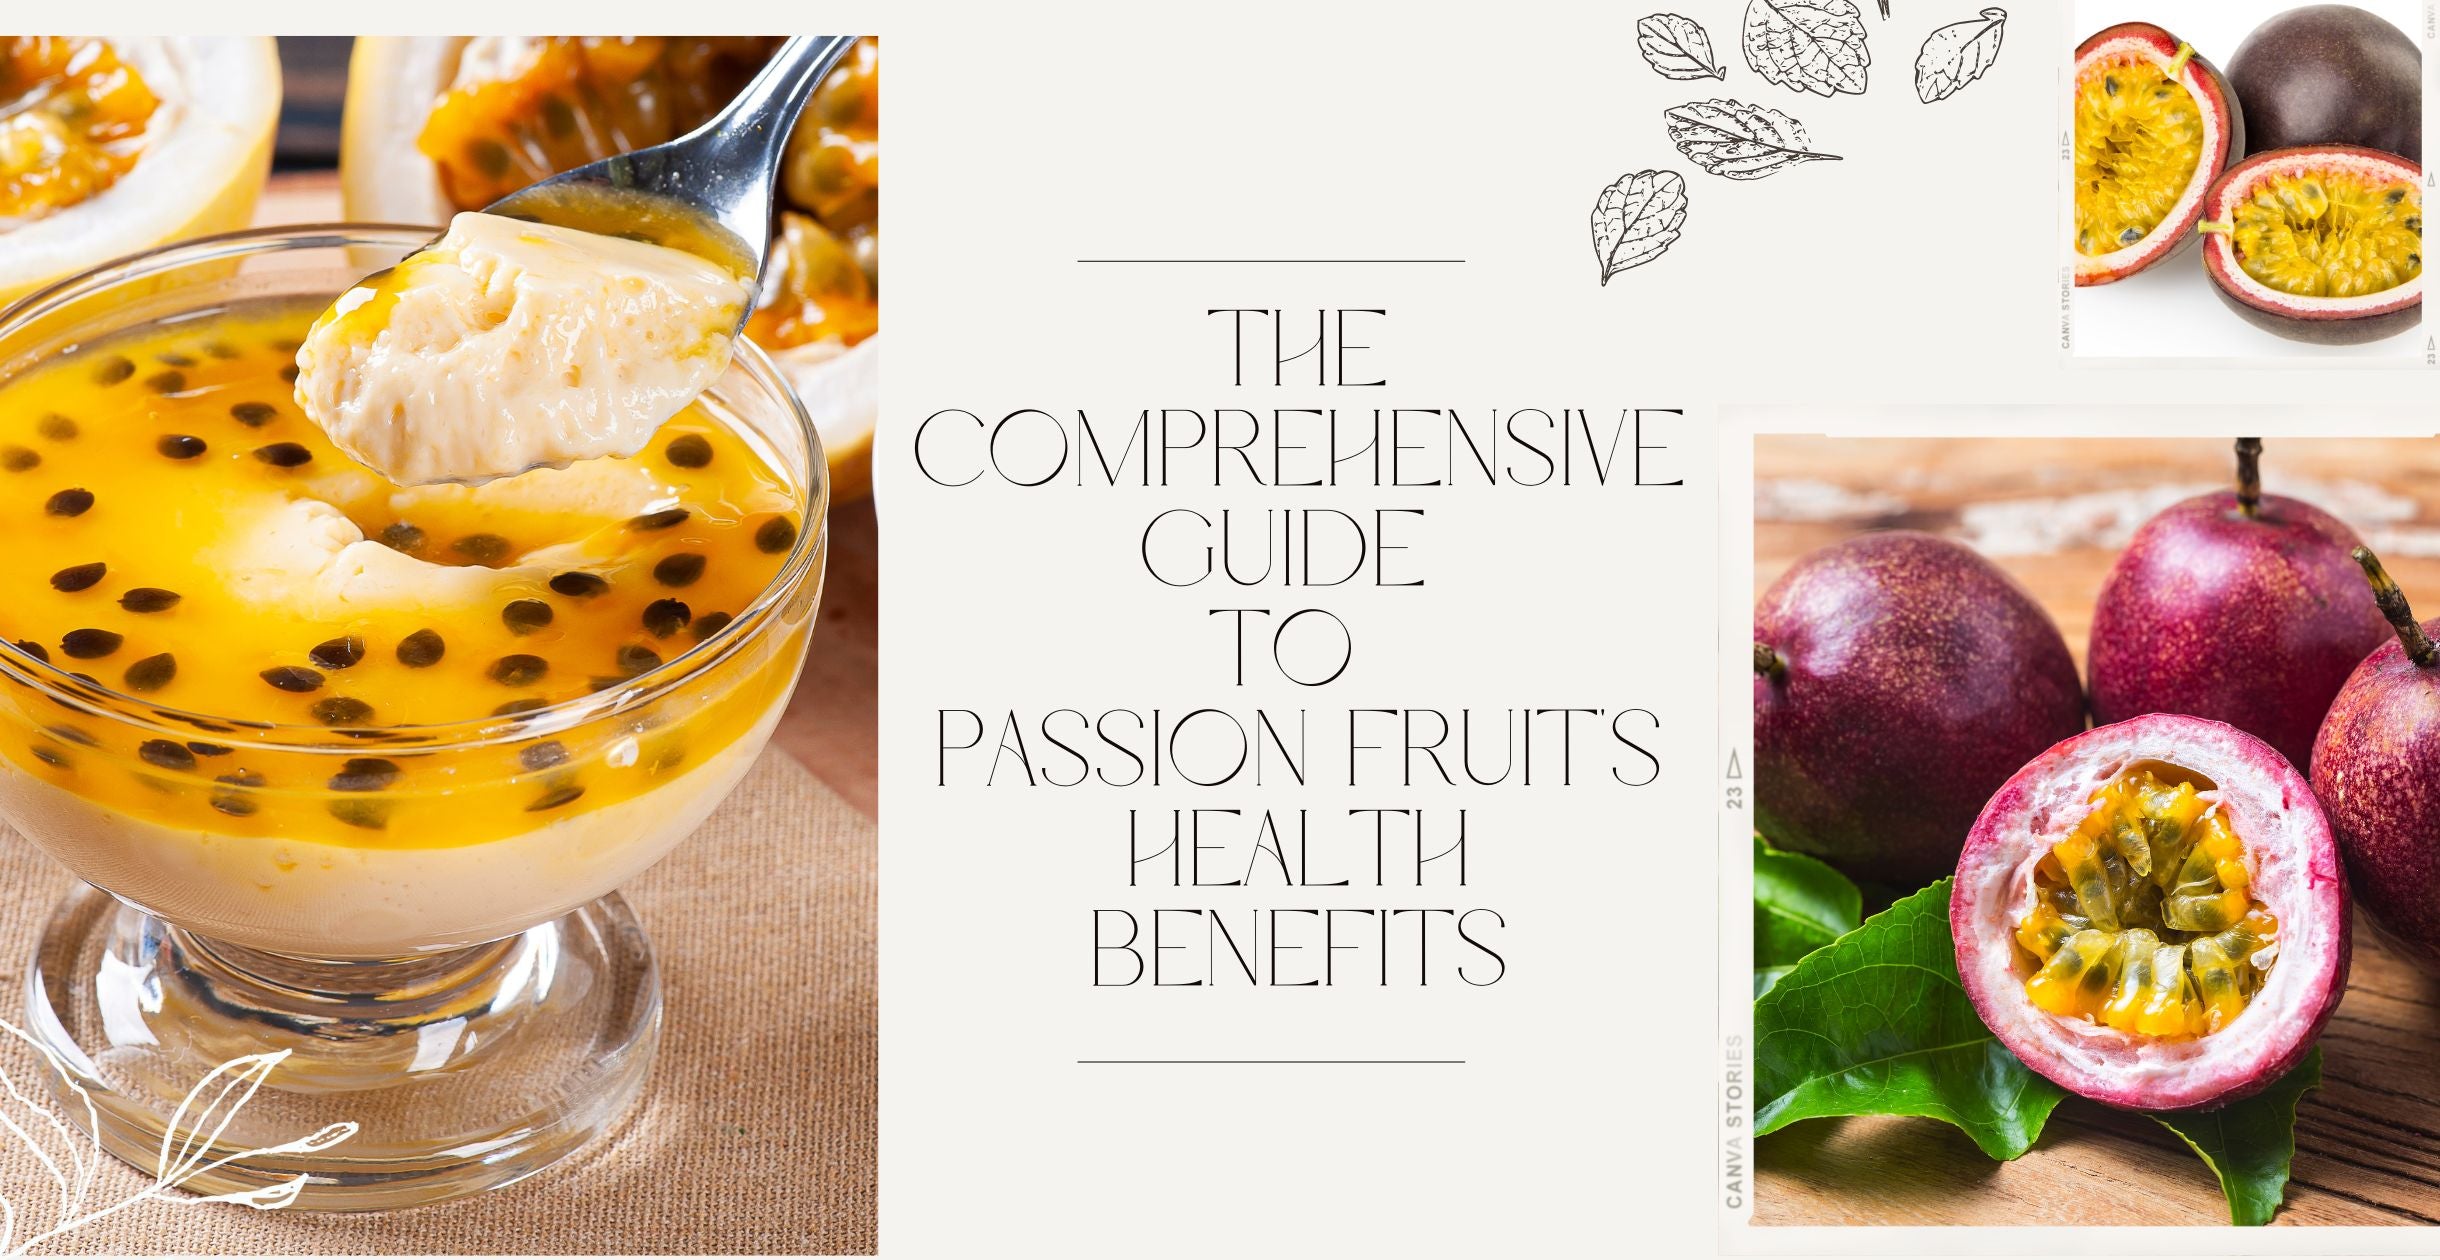 The Comprehensive Guide to Passion Fruit's Health Benefits